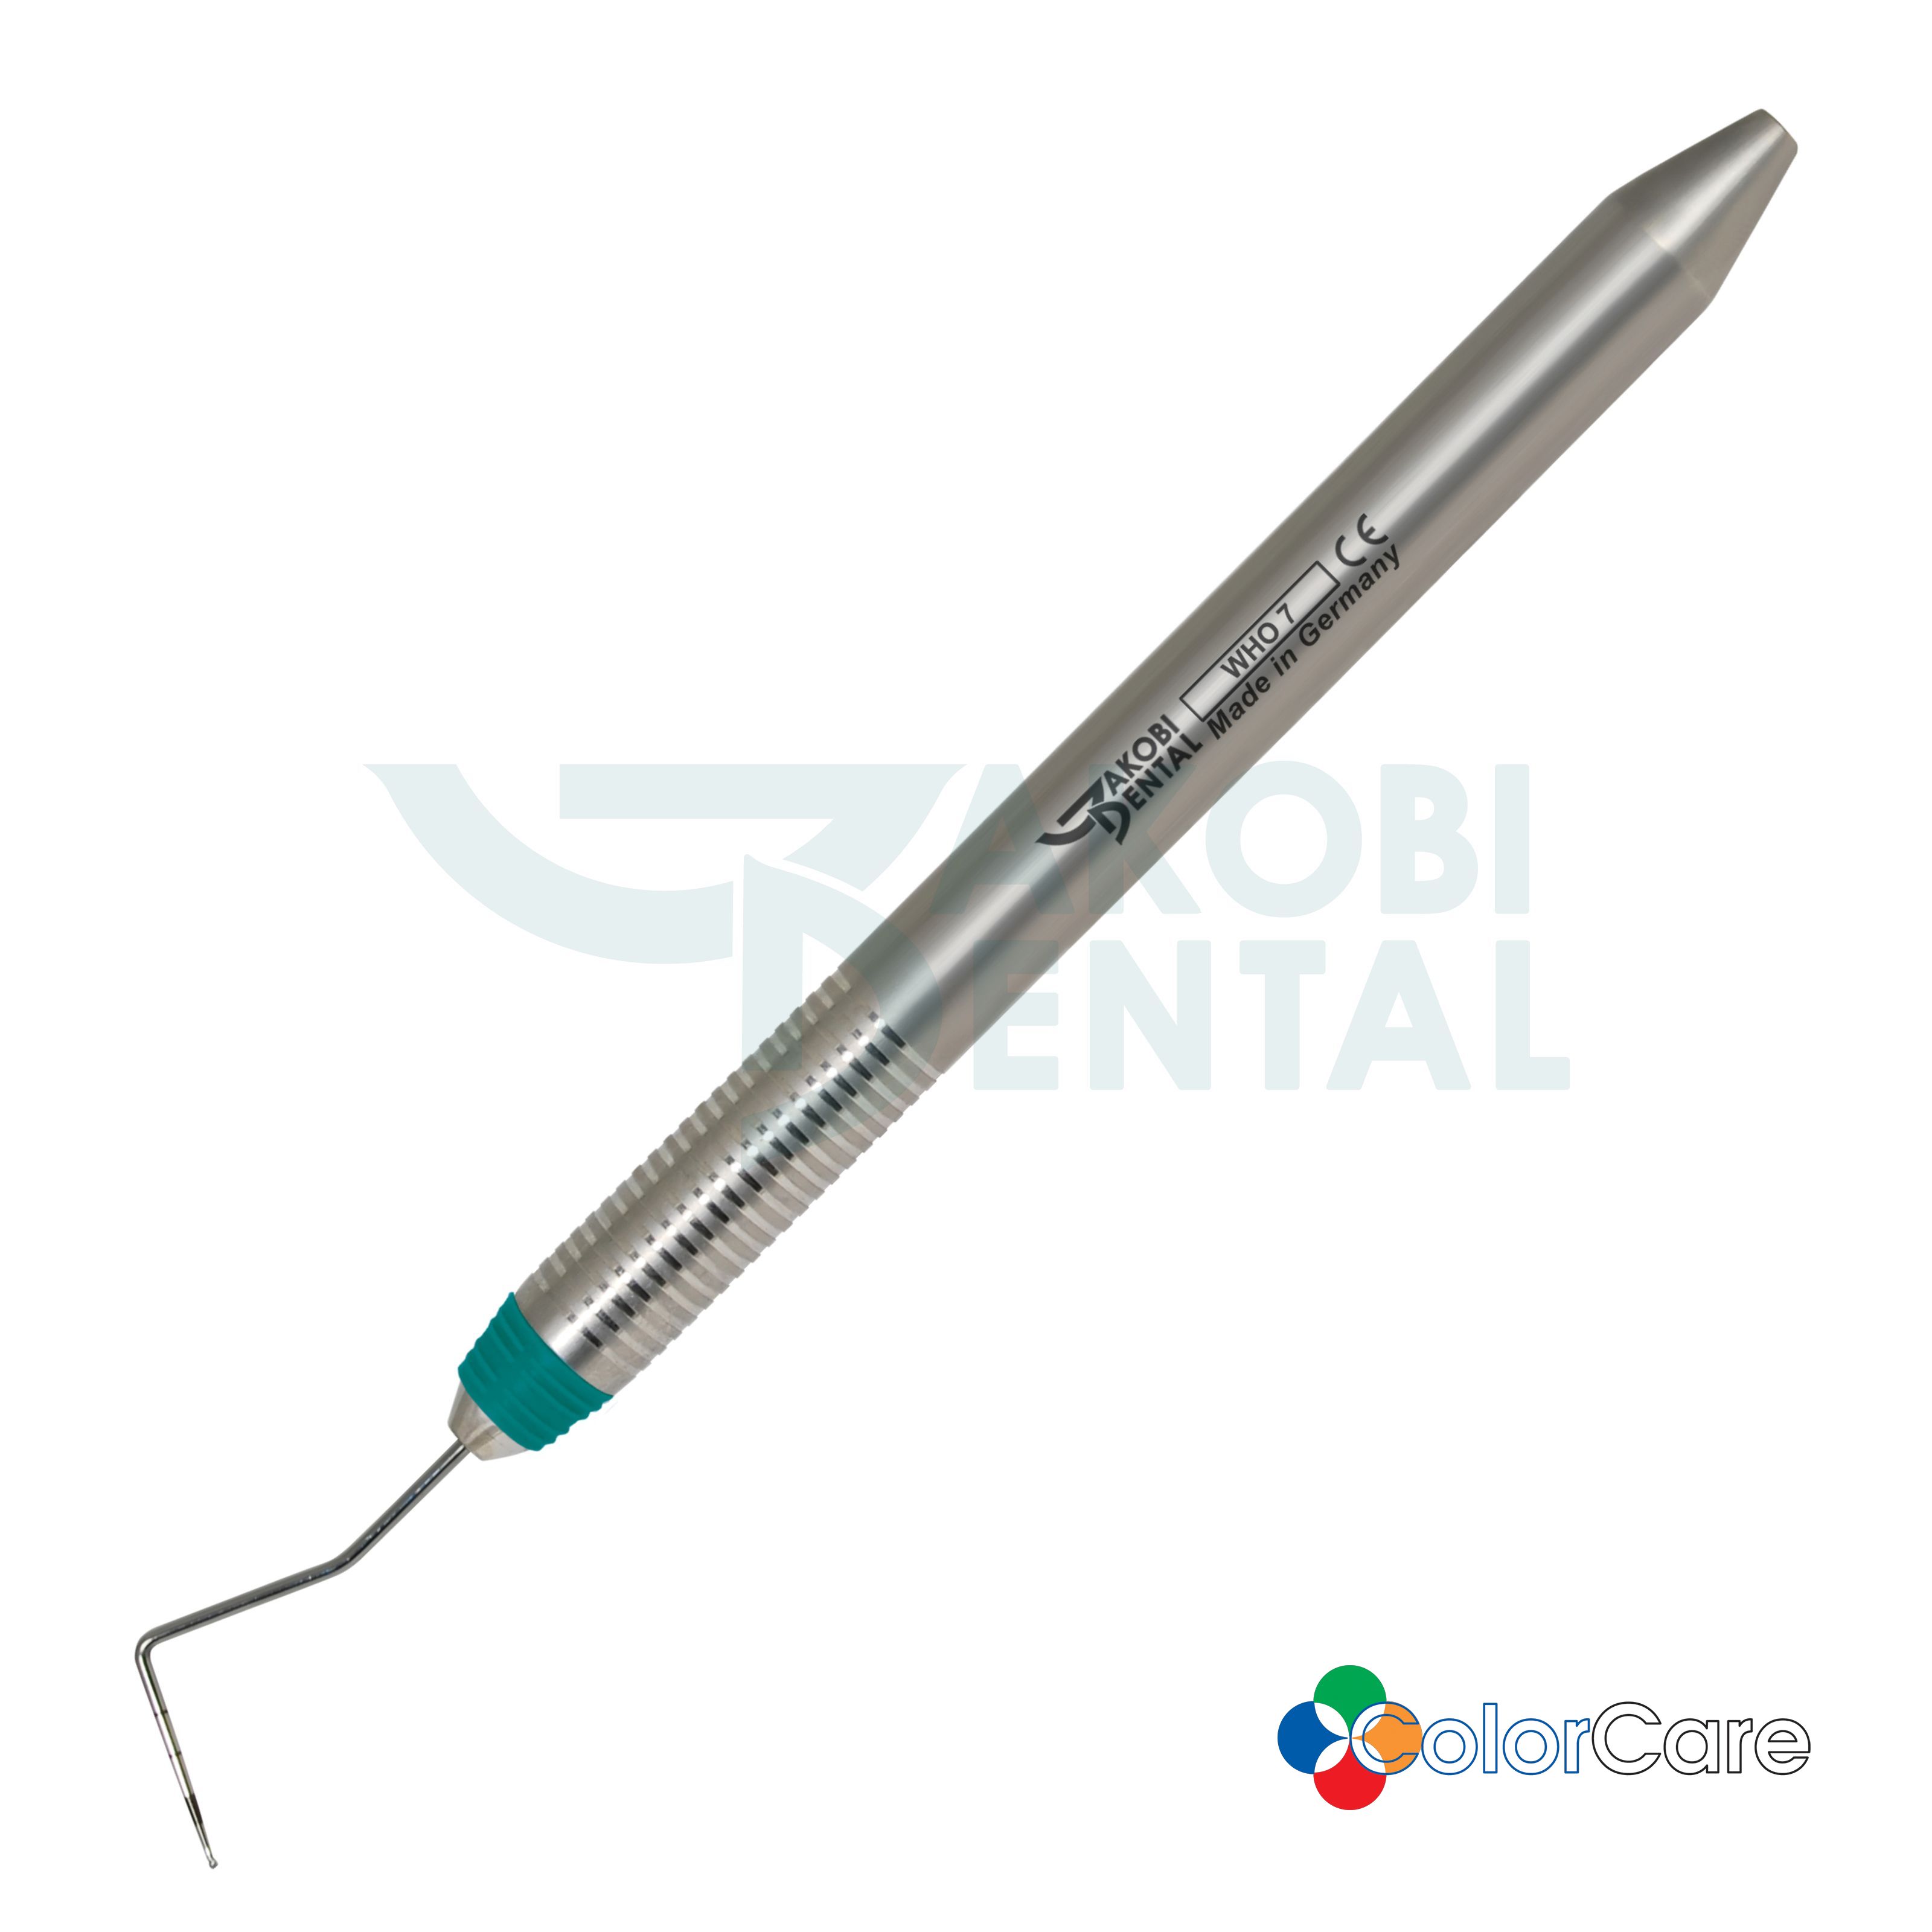 Periodontal probe WHO with Ball Tip, ColorCare Handle # 7